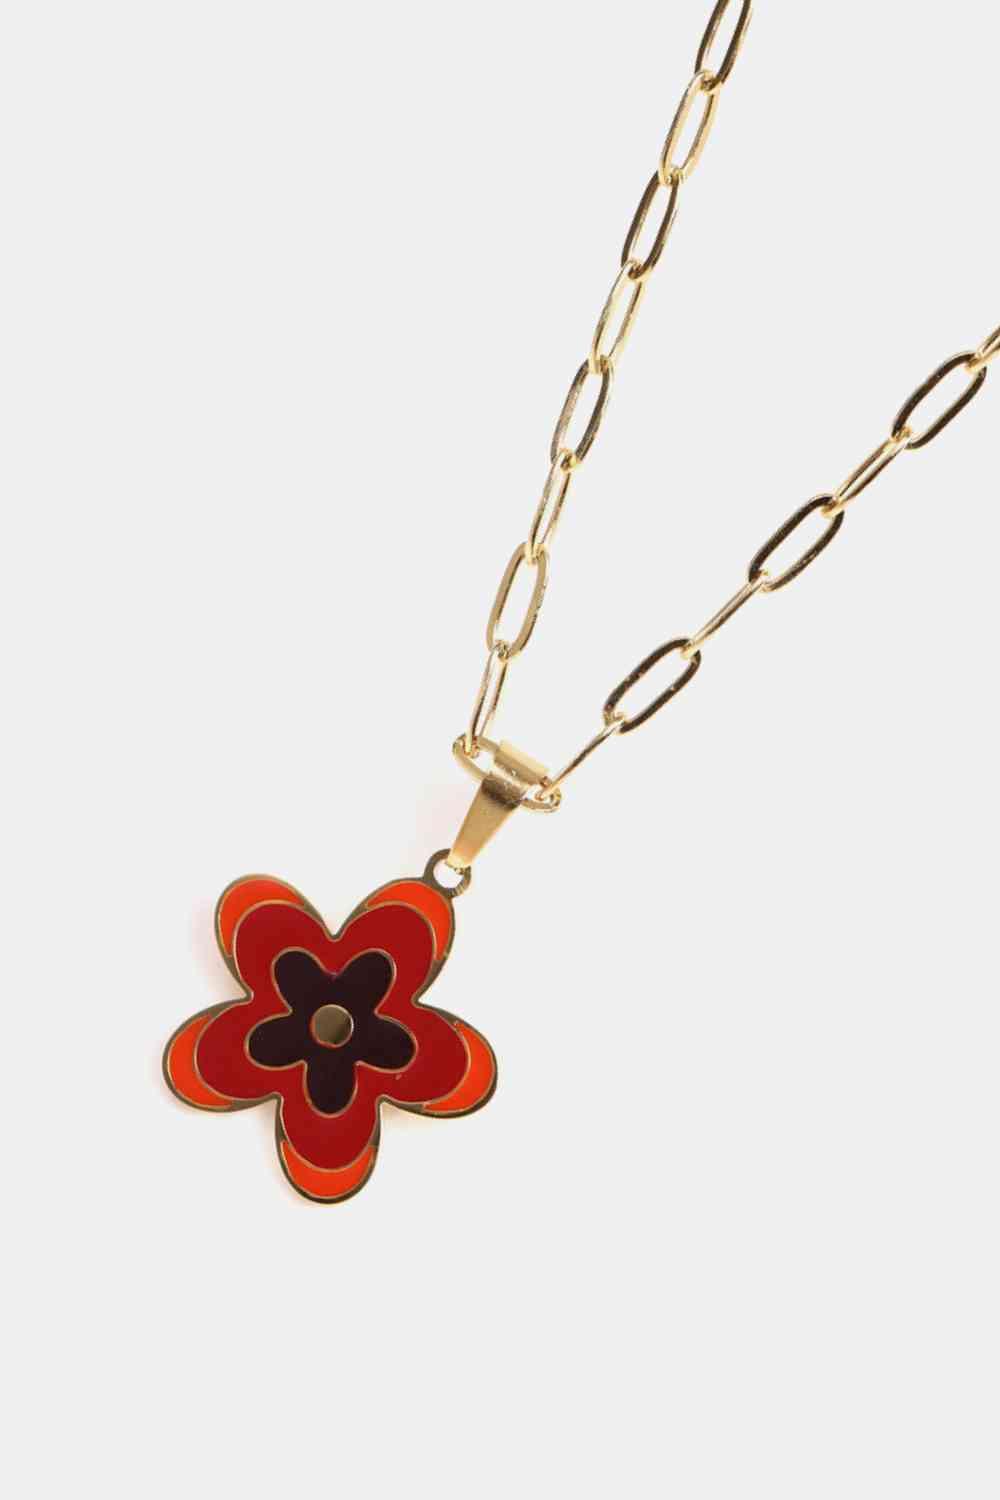 Flower Pendant Stainless Steel Necklace - God's Girl Gifts And Apparel